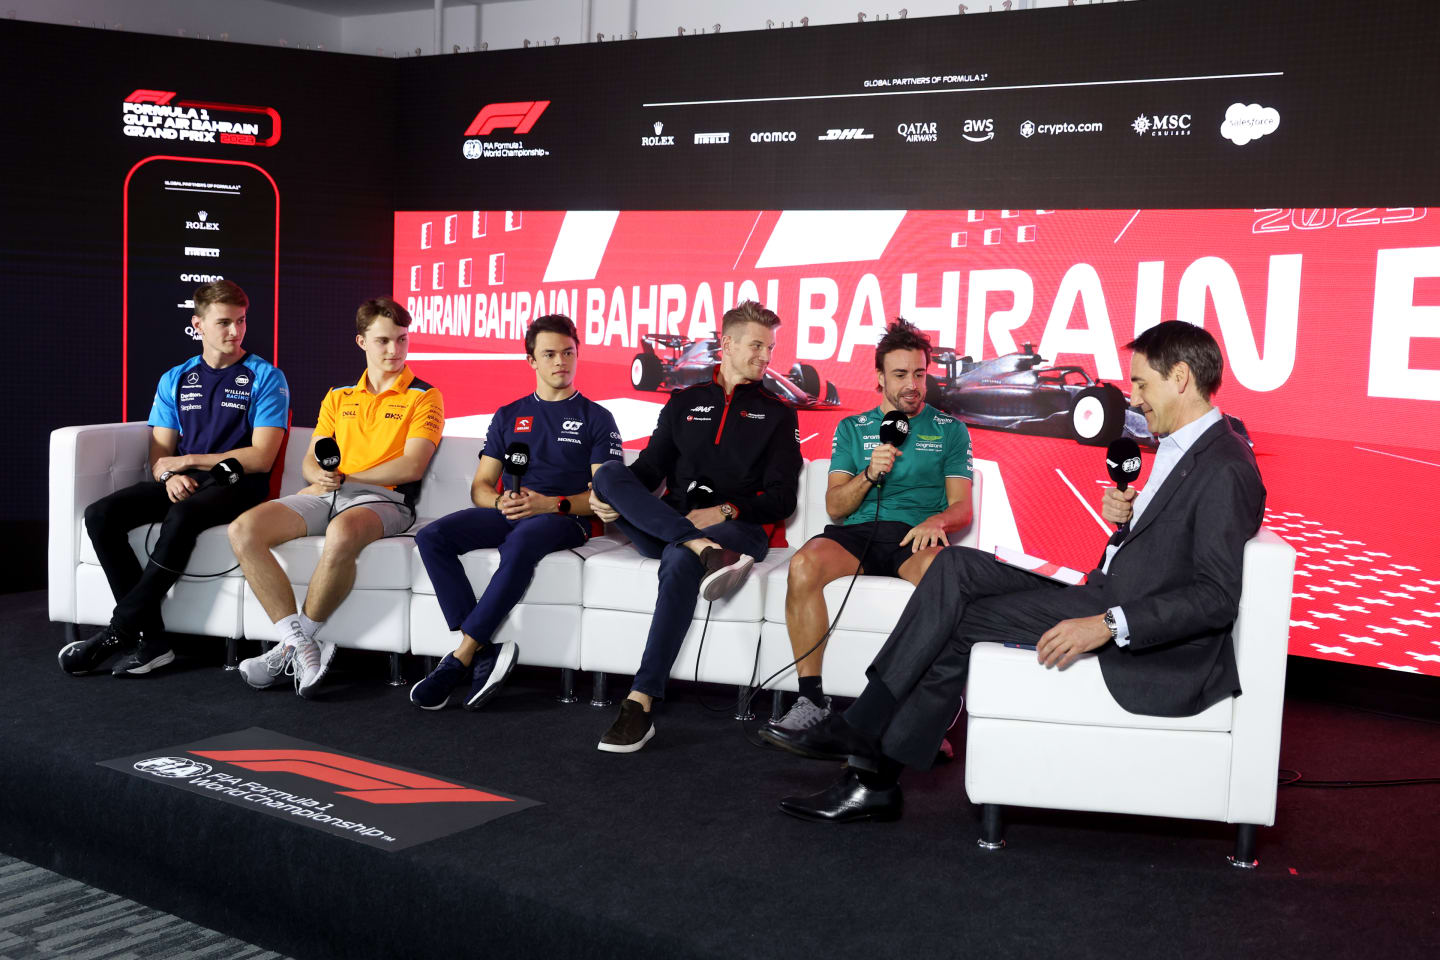 BAHRAIN, BAHRAIN - MARCH 02: (L-R) Logan Sargeant of United States and Williams, Oscar Piastri of Australia and McLaren, Nyck de Vries of Netherlands and Scuderia AlphaTauri, Nico Hulkenberg of Germany and Haas F1 and Fernando Alonso of Spain and Aston Martin F1 Team attend the Drivers Press Conference during previews ahead of the F1 Grand Prix of Bahrain at Bahrain International Circuit on March 02, 2023 in Bahrain, Bahrain. (Photo by Lars Baron/Getty Images)